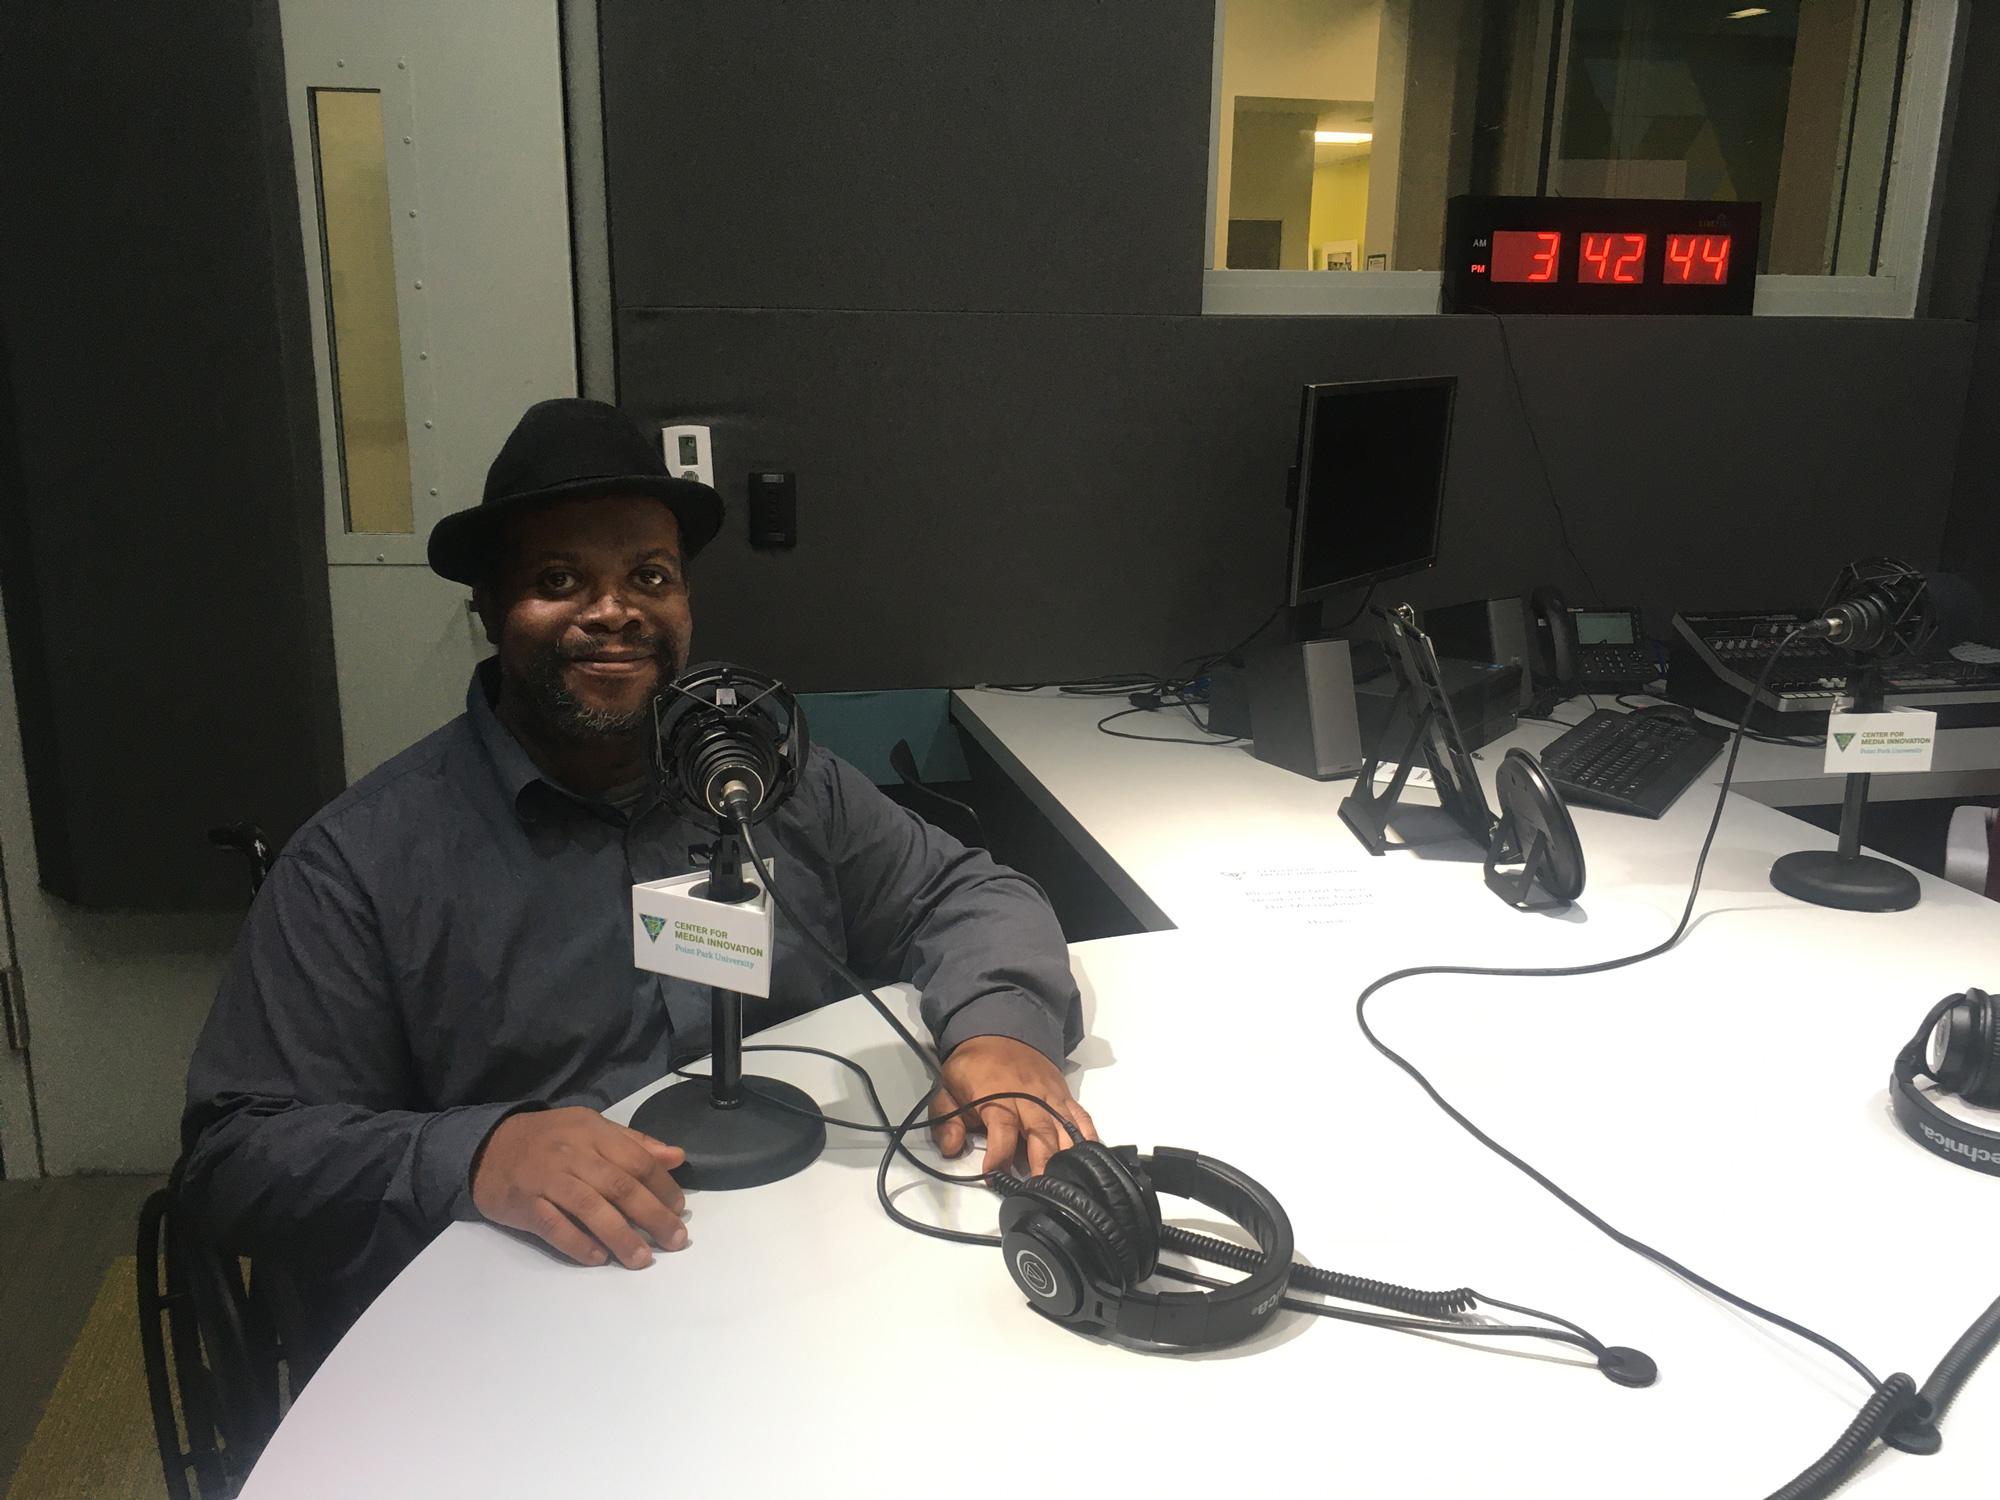 Photograph of David Hale, a Black man wearing a fedora. He's sitting behind a microphone in a podcast studio.